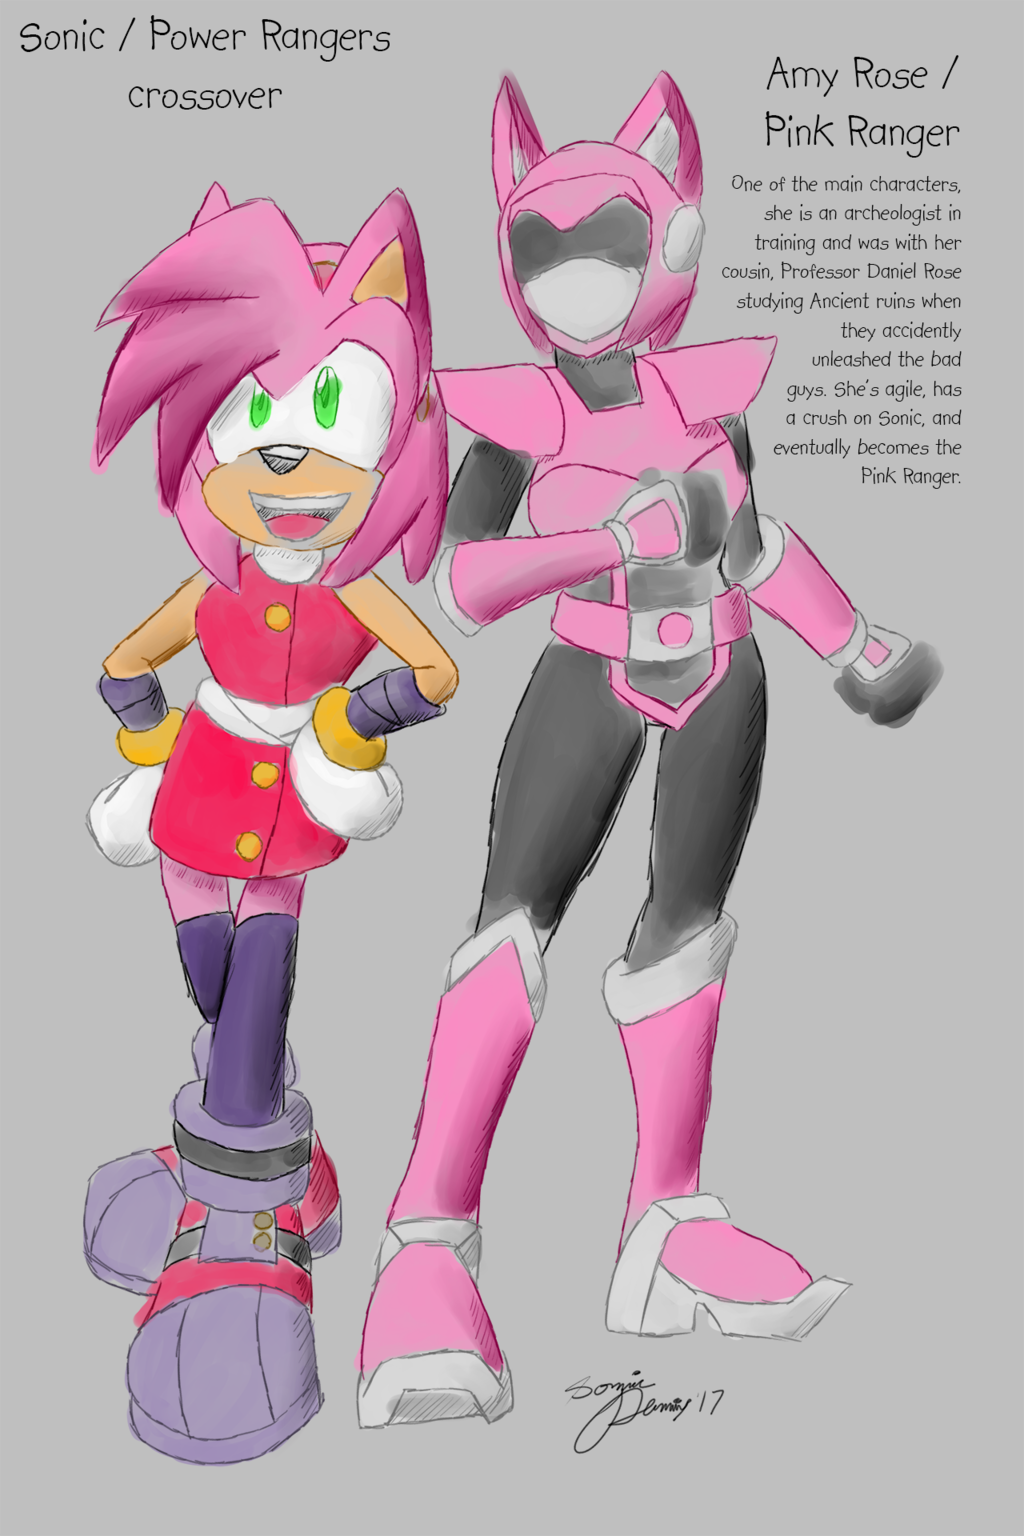 Most recent image: Sonic x Power Rangers - Amy Rose/Pink Ranger